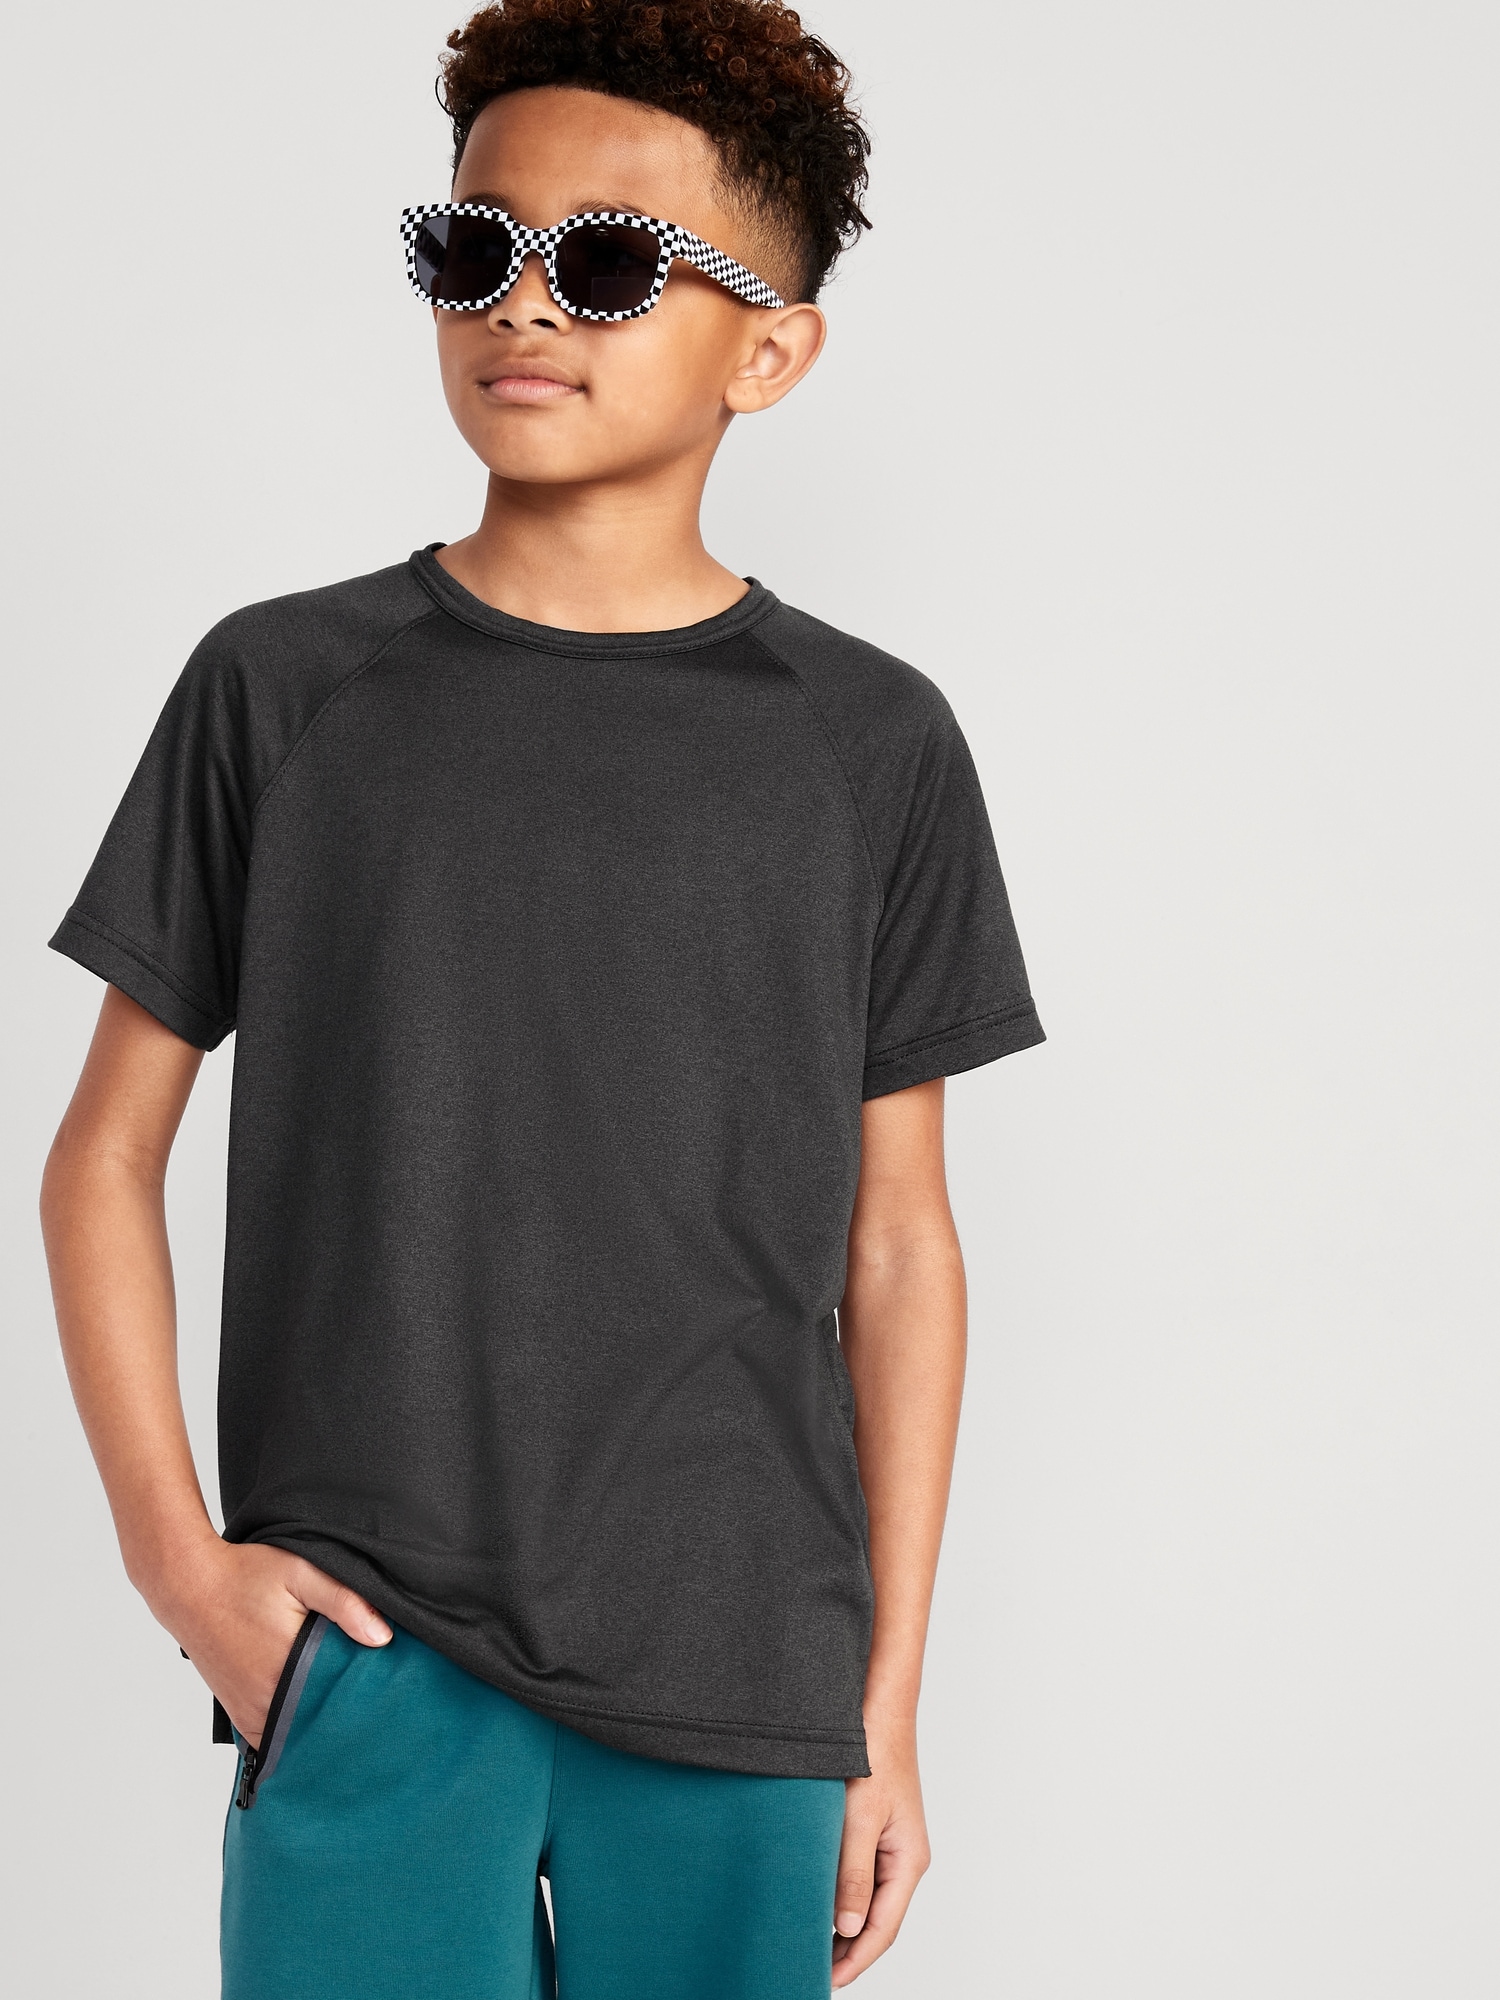 Old Navy Cloud 94 Soft Performance T-Shirt for Boys black. 1